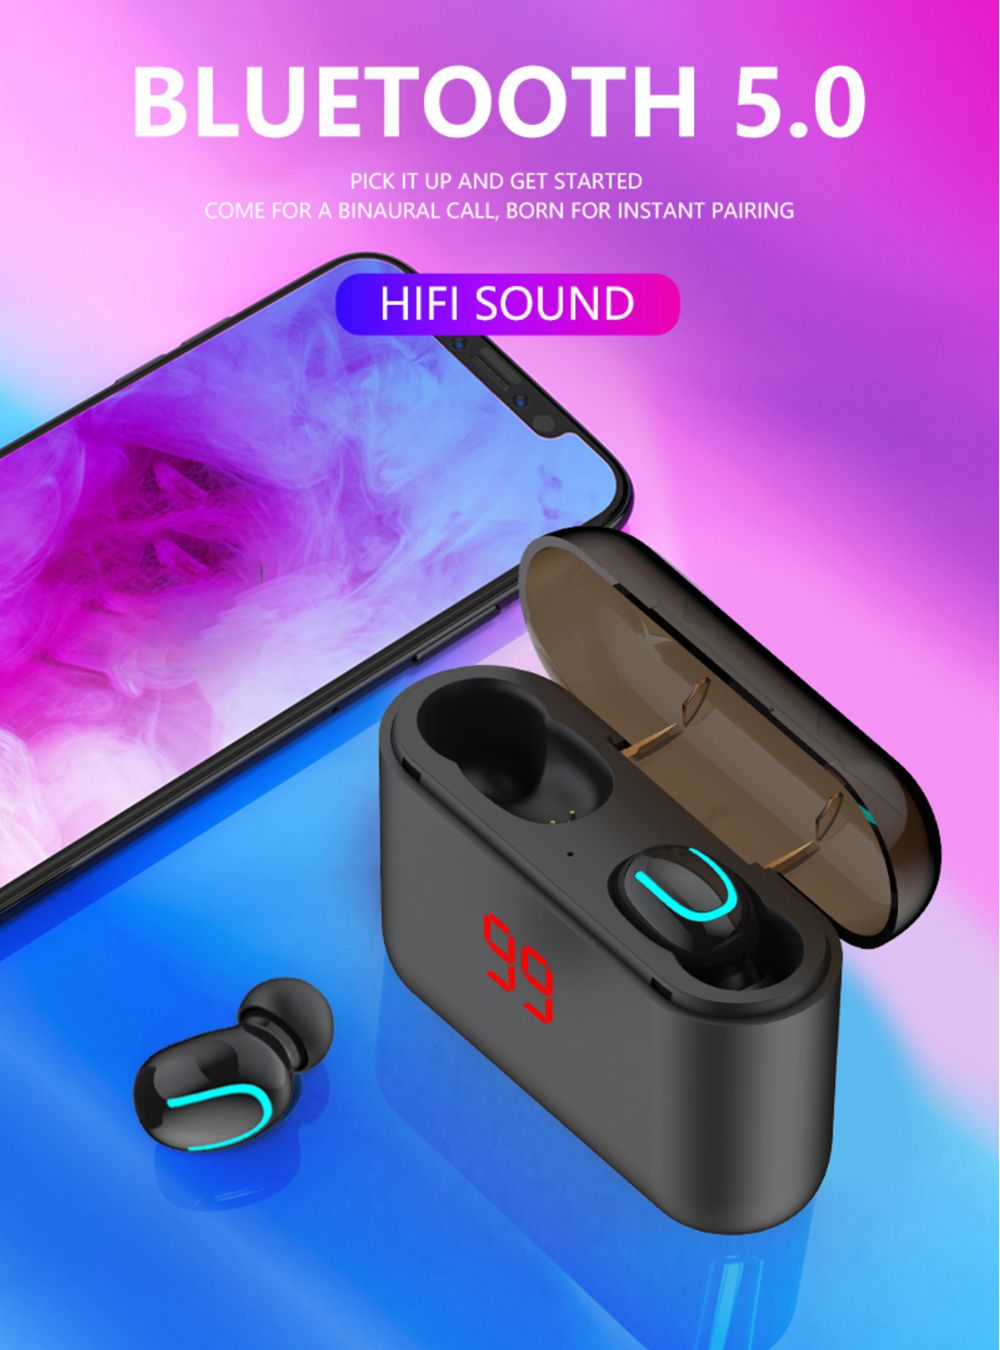 Q32 Bluetooth 5.0 True Wireless Earphones HD Binaural Call Used Independently with 1500mAh Charging Case 120 Hours Standby Time IPX5 - Black